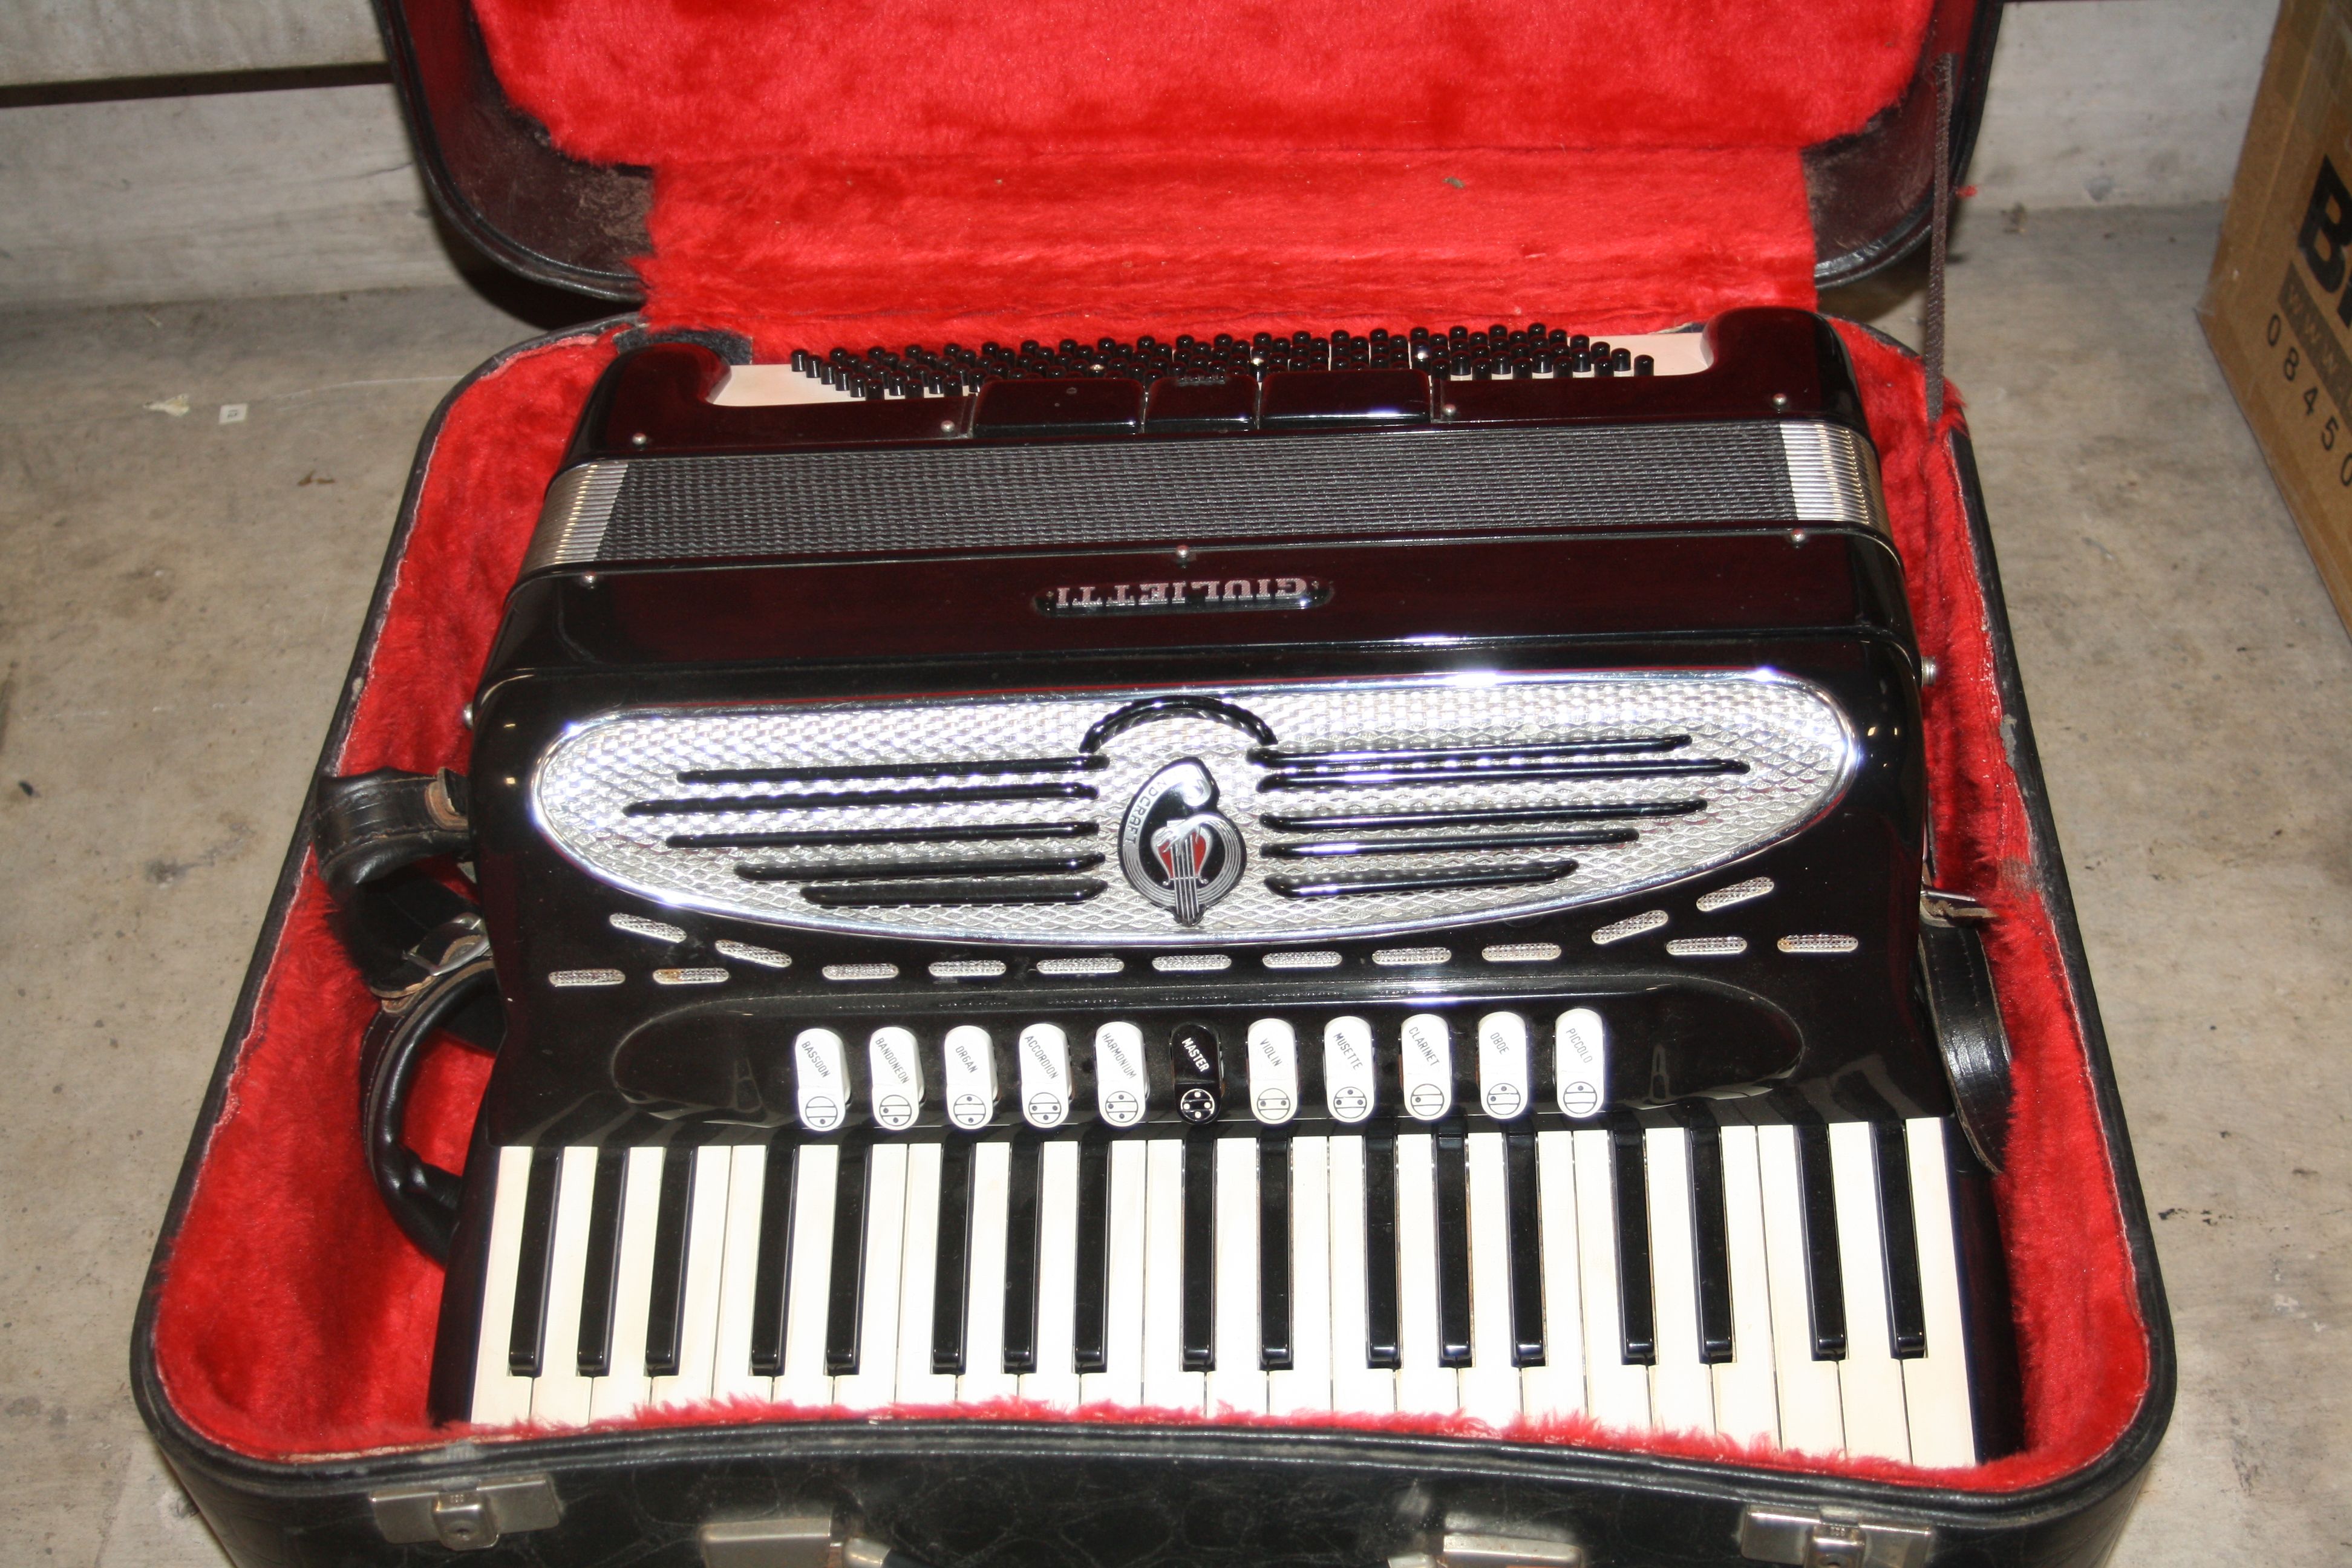 A GUULIETTI CLASSIC 57 ACORDIAN IN CASE with 41 keys in very good condition but hasn't been tested